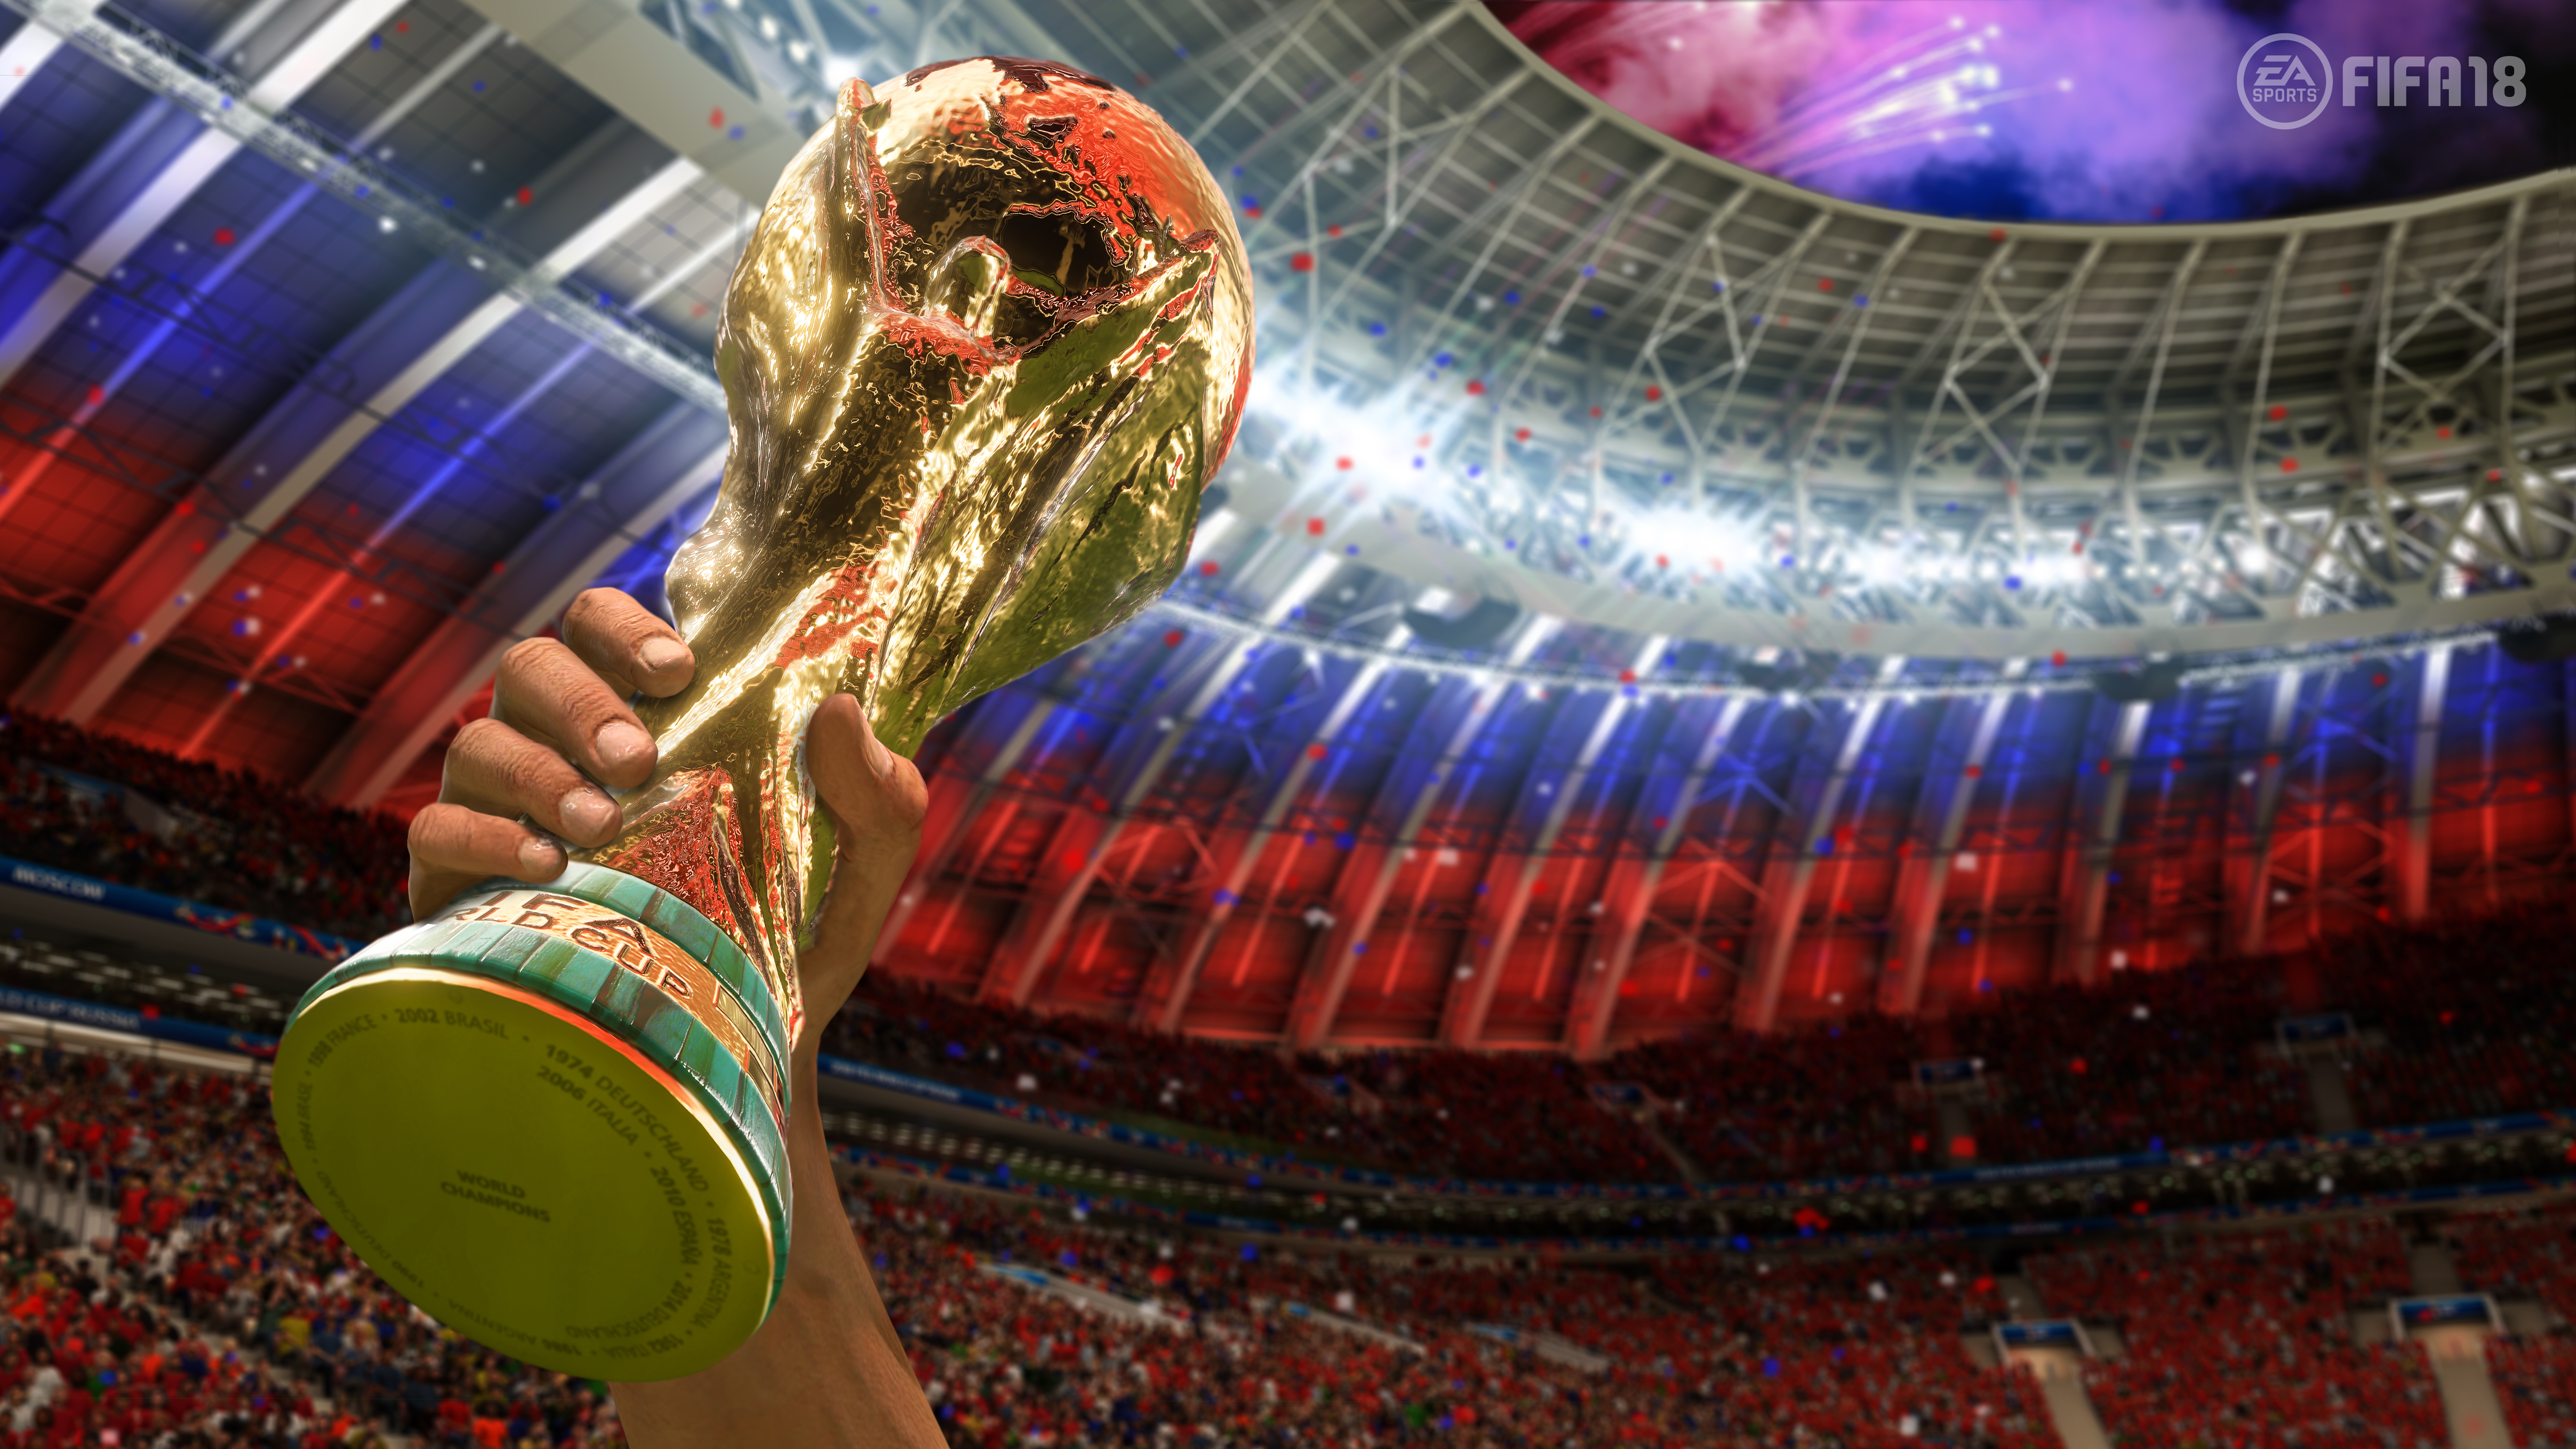 The World Cup trophy is lifted in Fifa 18